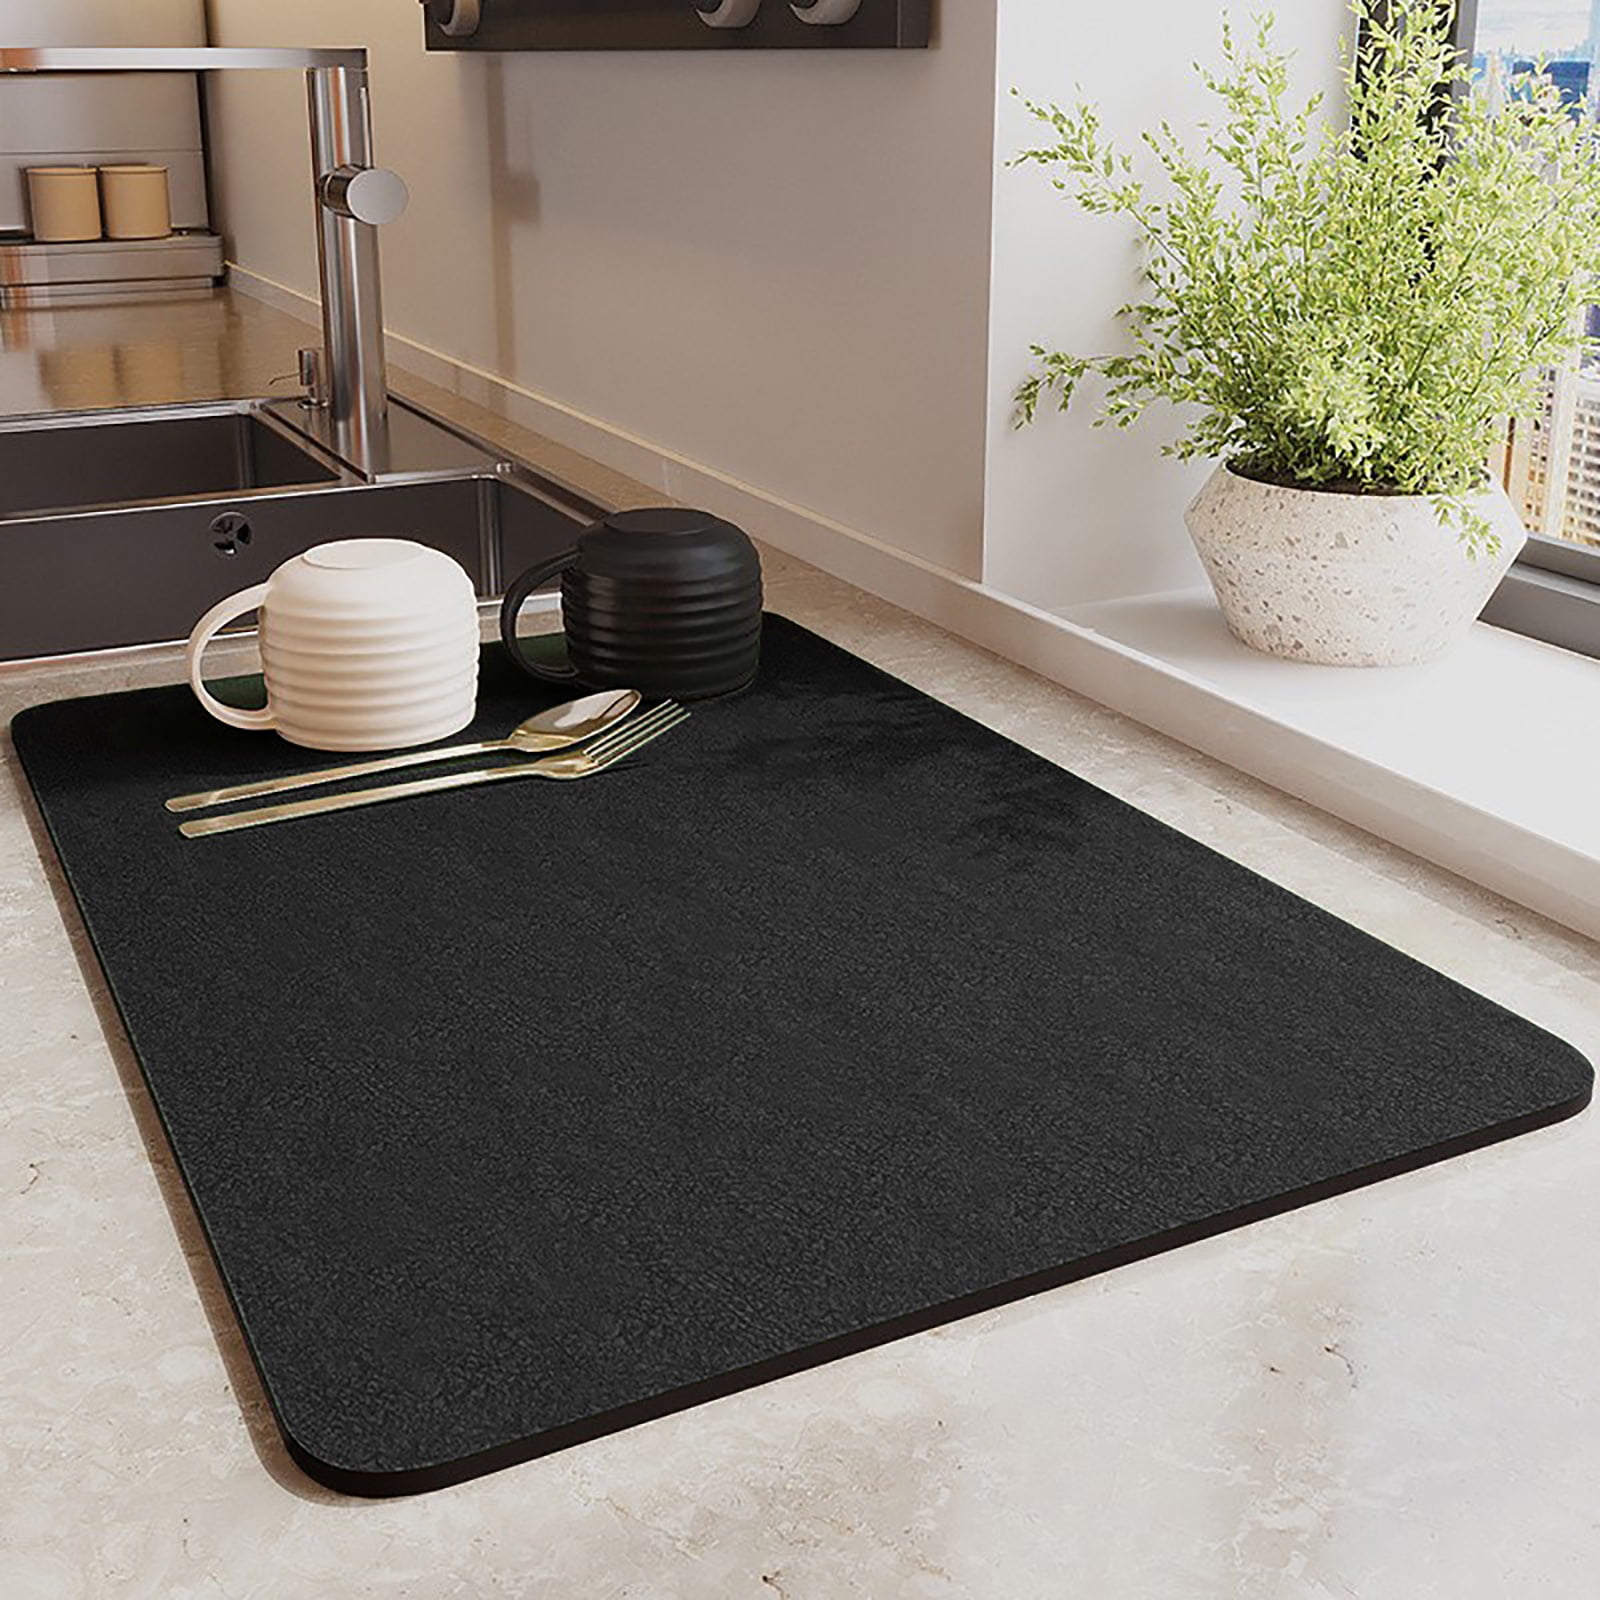 PtRug Coffee Bar Mat Rubber Dish Drying Mat for Kitchen Counter Coffee Mat for Home Bar Gift Kitchen Mat Coffee Bar Accessories Decorative Coffee Shop